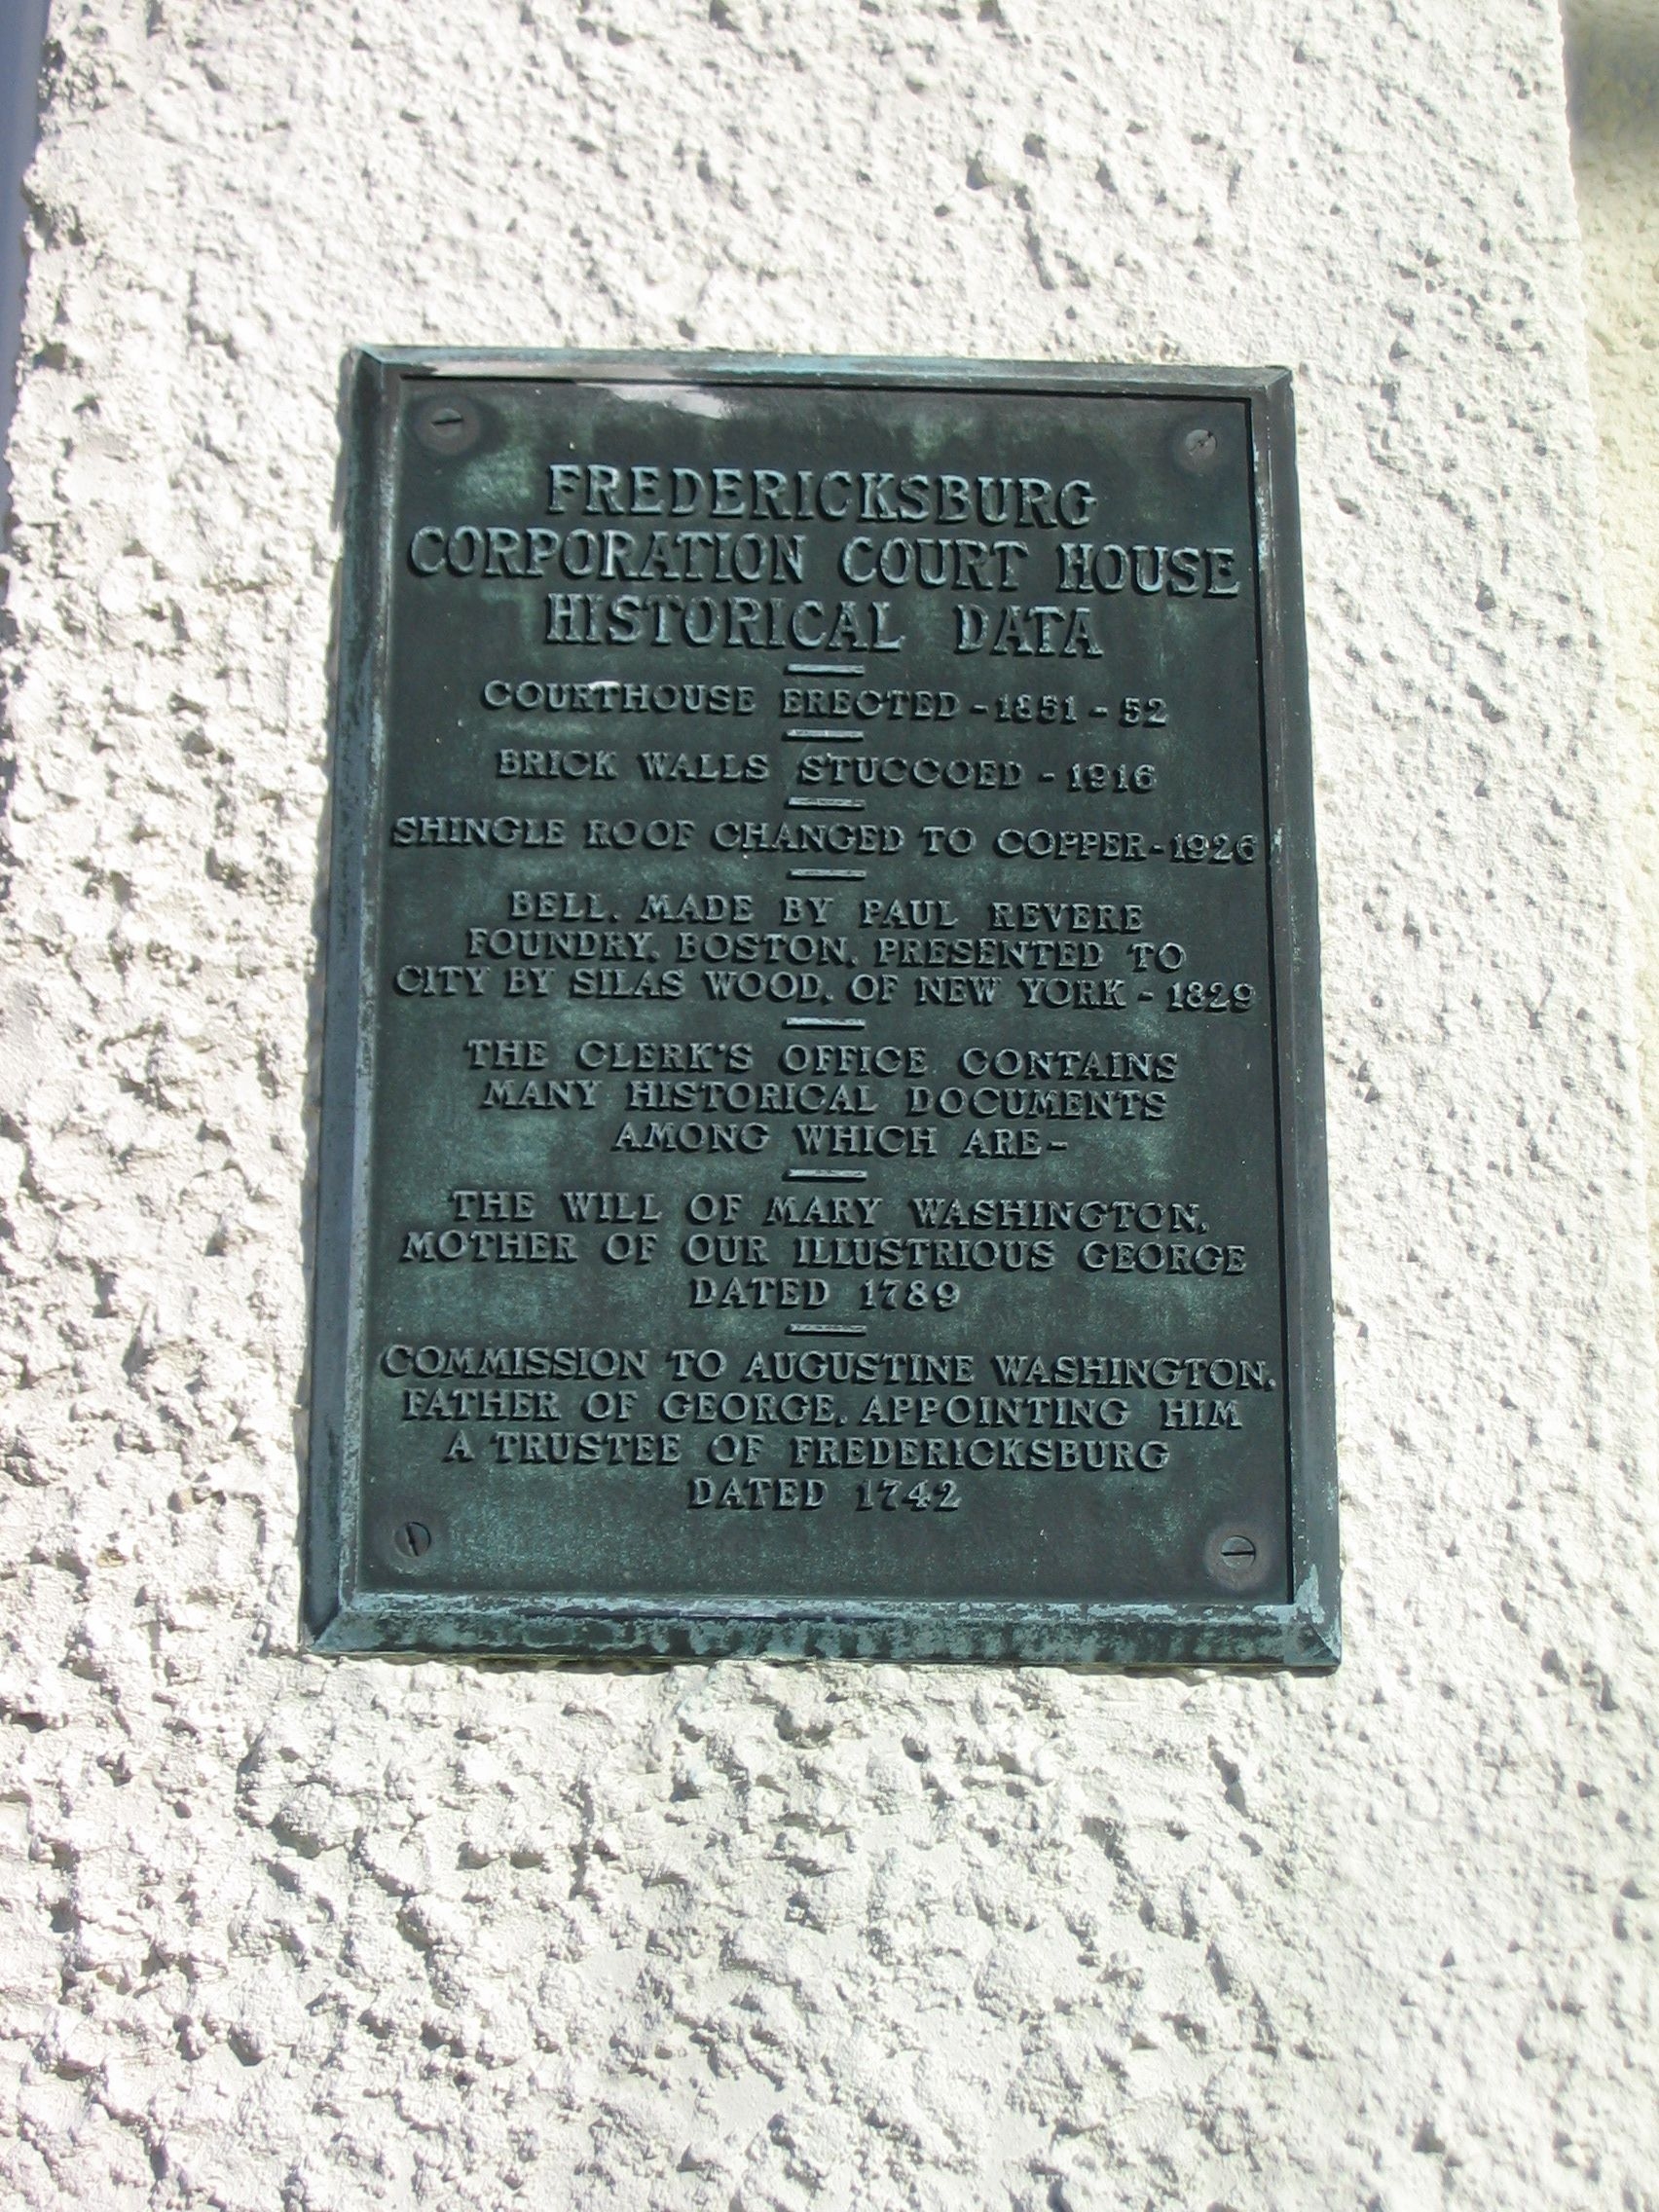 Corporation Court House, Right Side Plaque